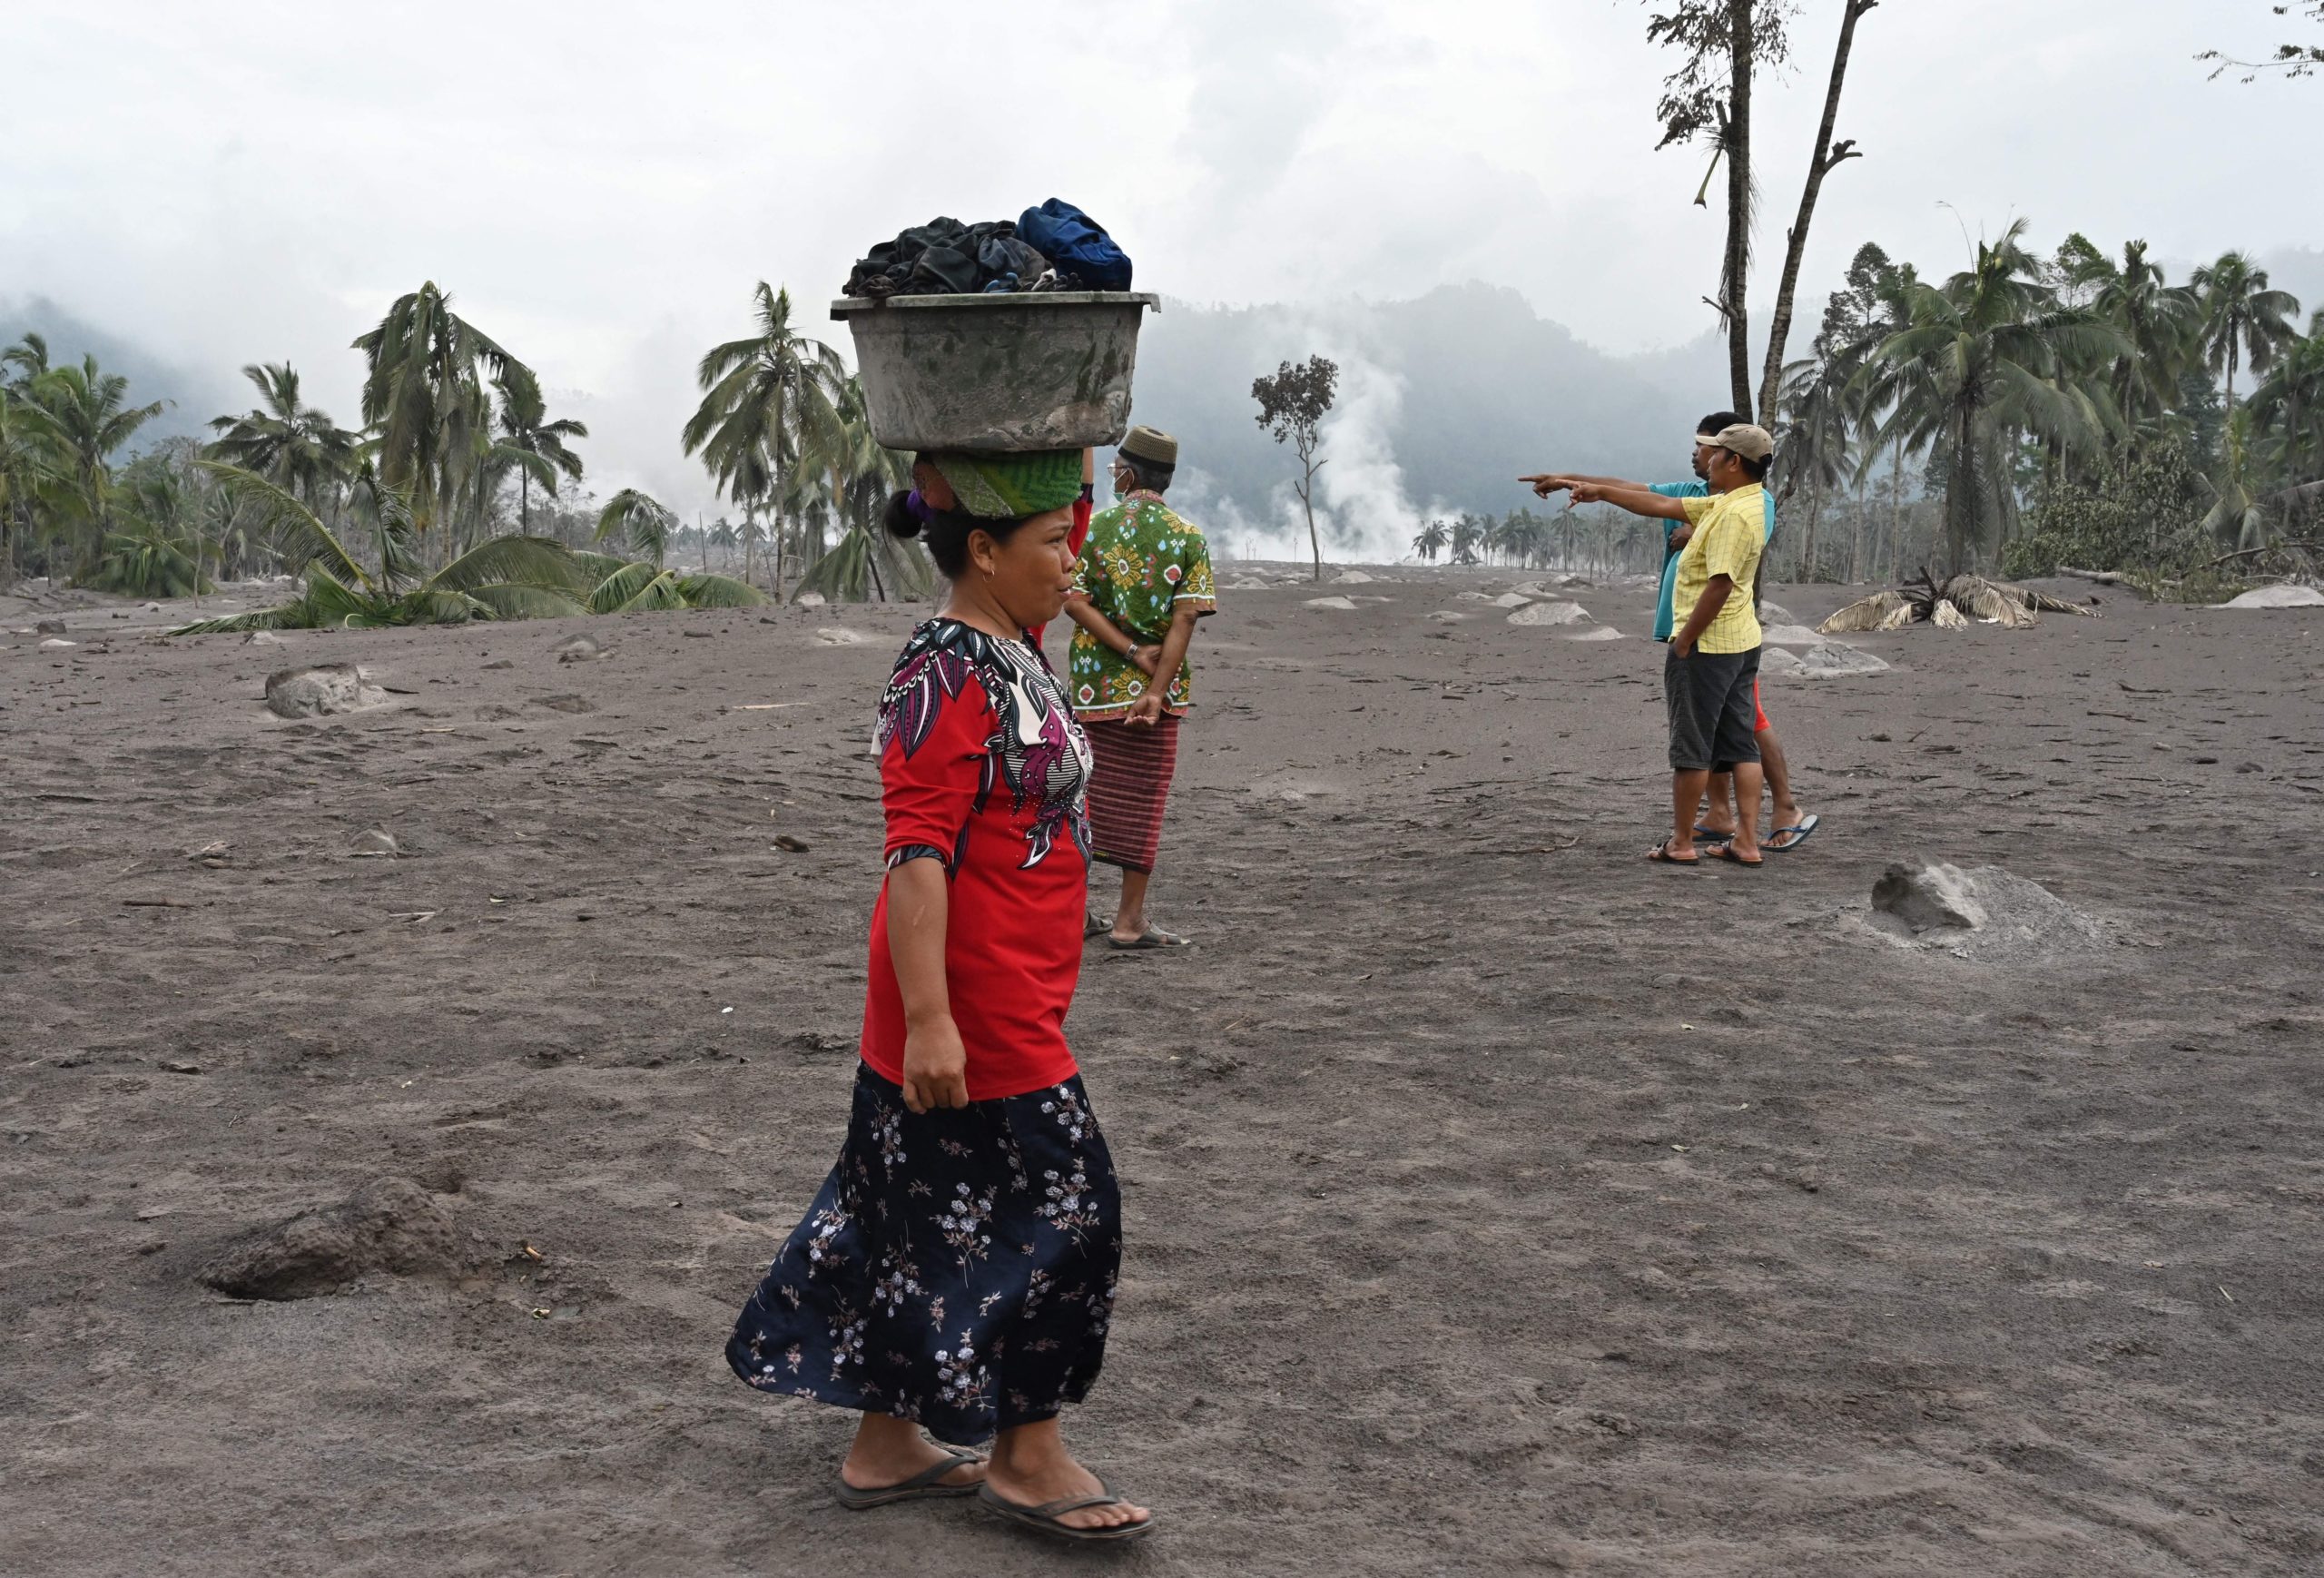 A woman salvages her belongings at the Sumberwuluh village. (Photo: Adek Berry/AFP, Getty Images)